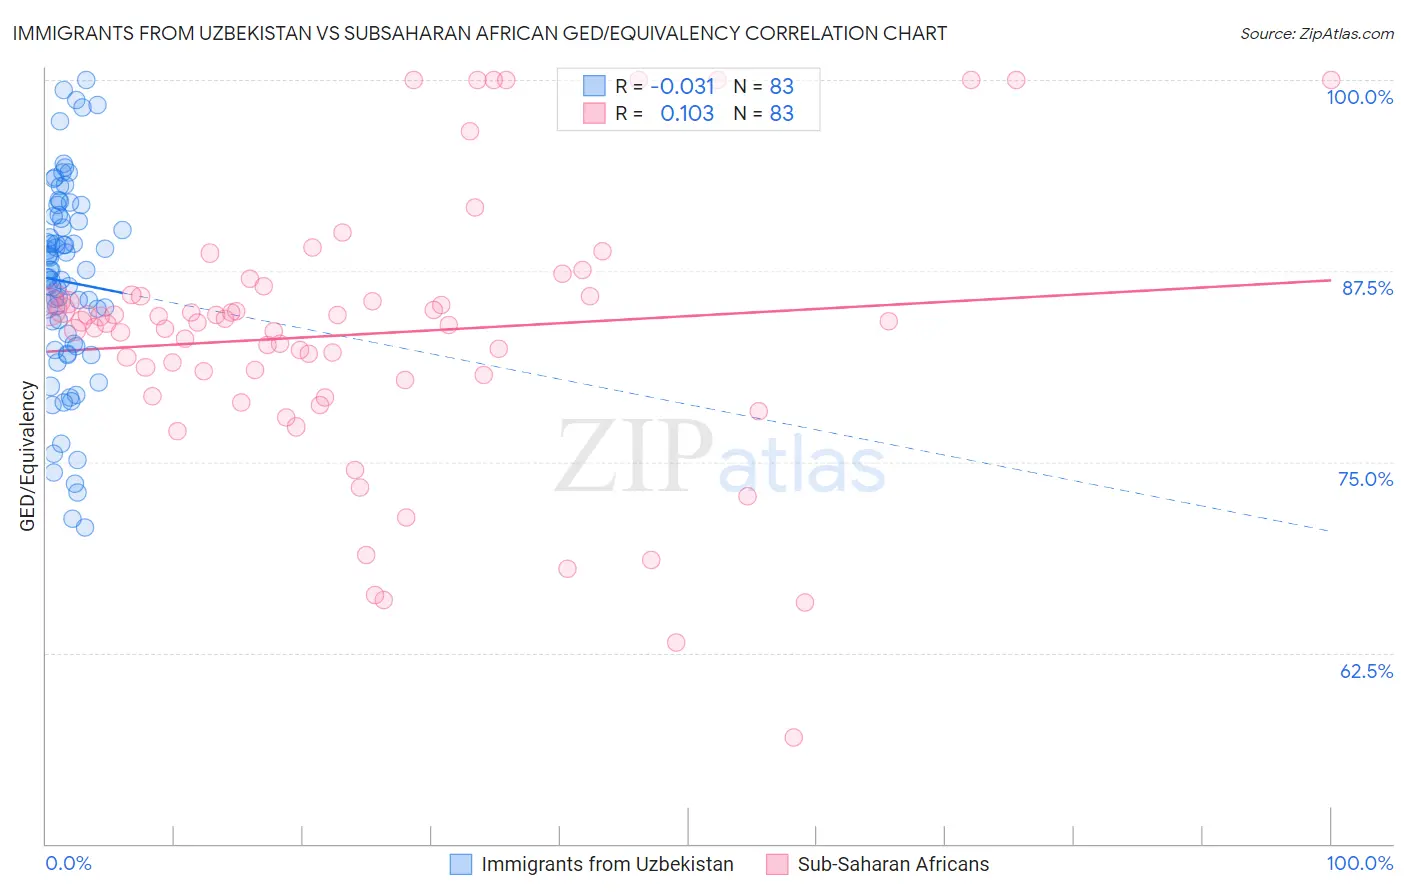 Immigrants from Uzbekistan vs Subsaharan African GED/Equivalency